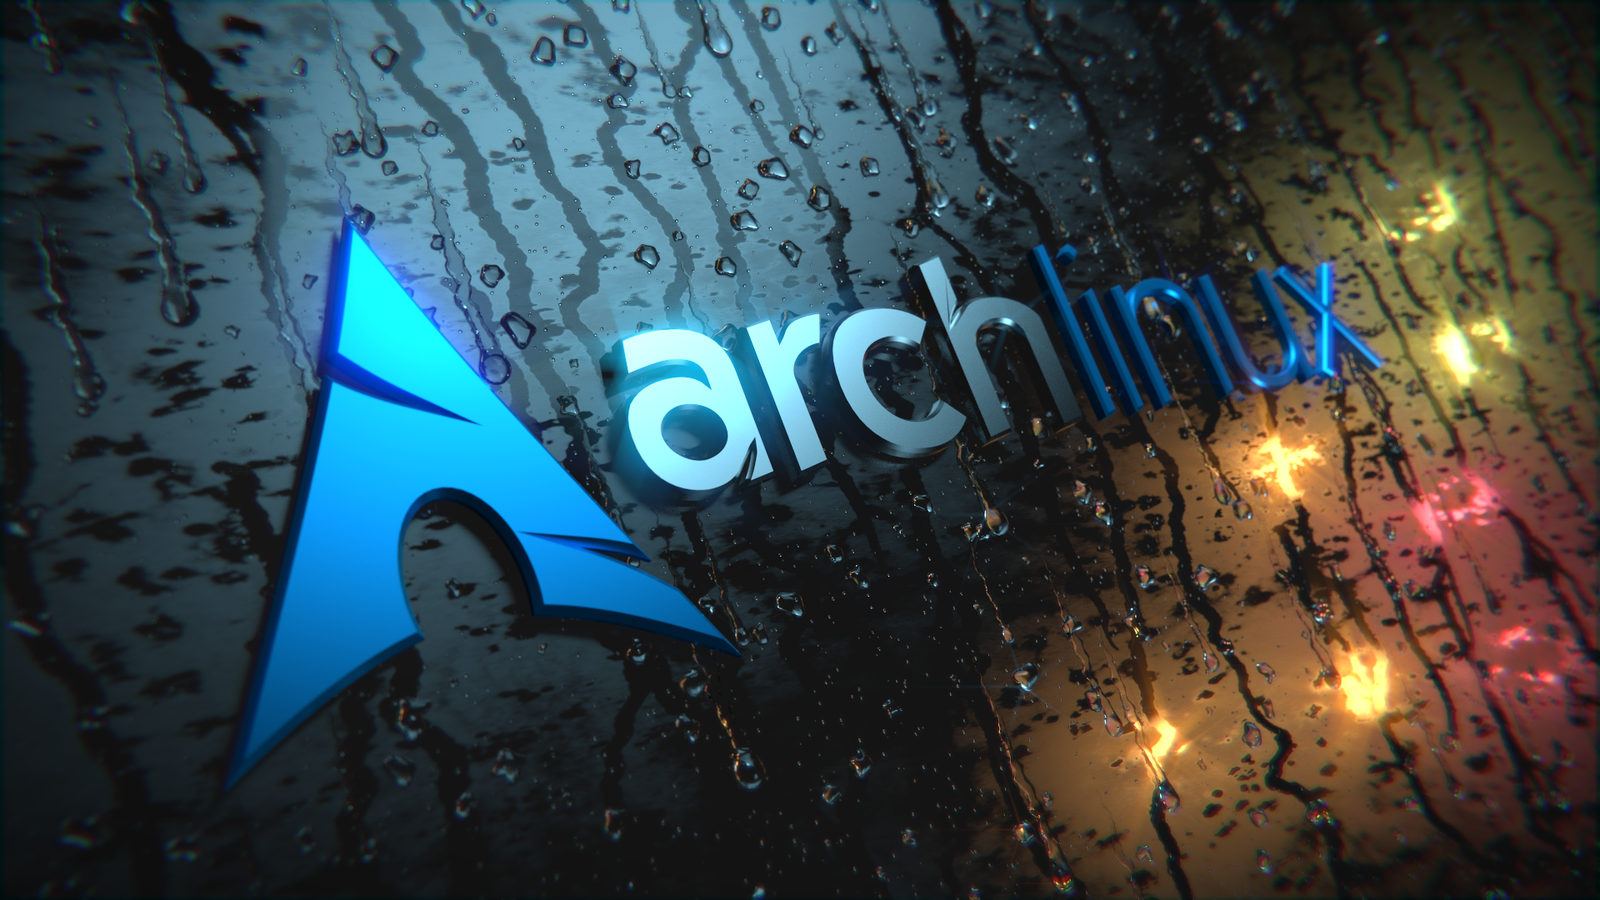 Arch Linux 16 11 01 Now Available For Download Powered By Linux Kernel 4 8 6